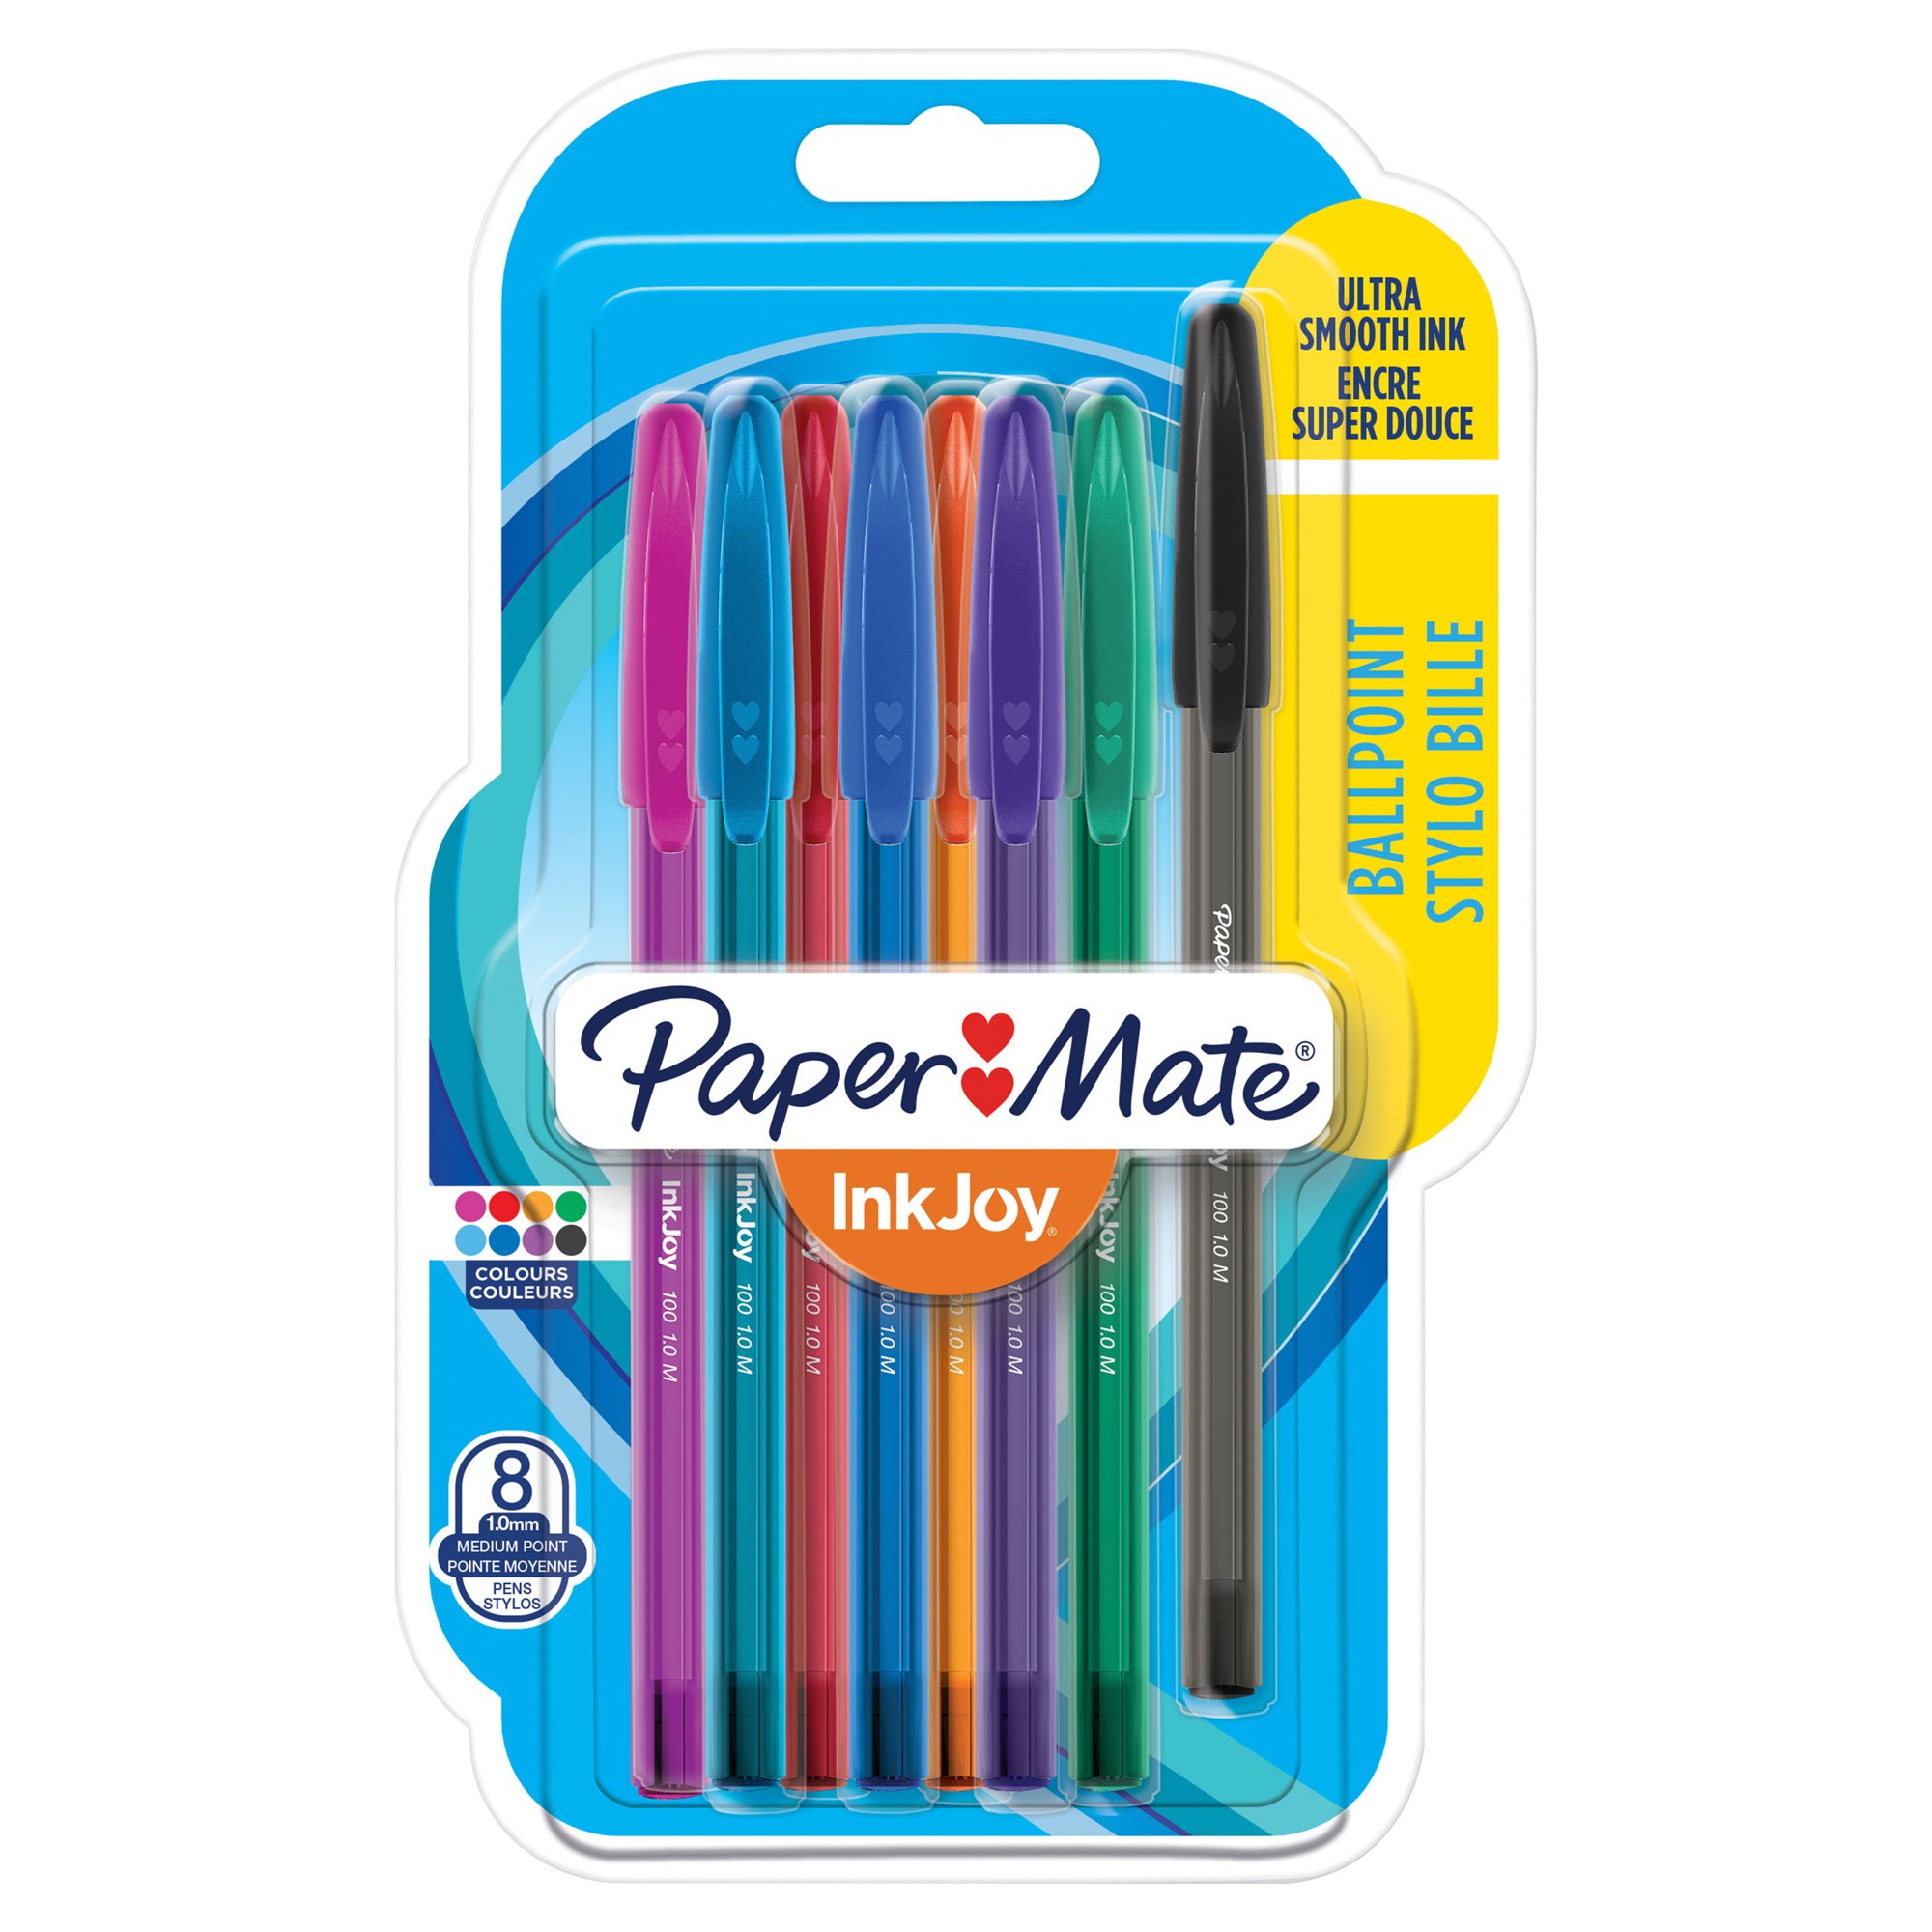 PaperMate Inkjoy 100 Capped Ballpoint Pens Medium Assorted (Pack